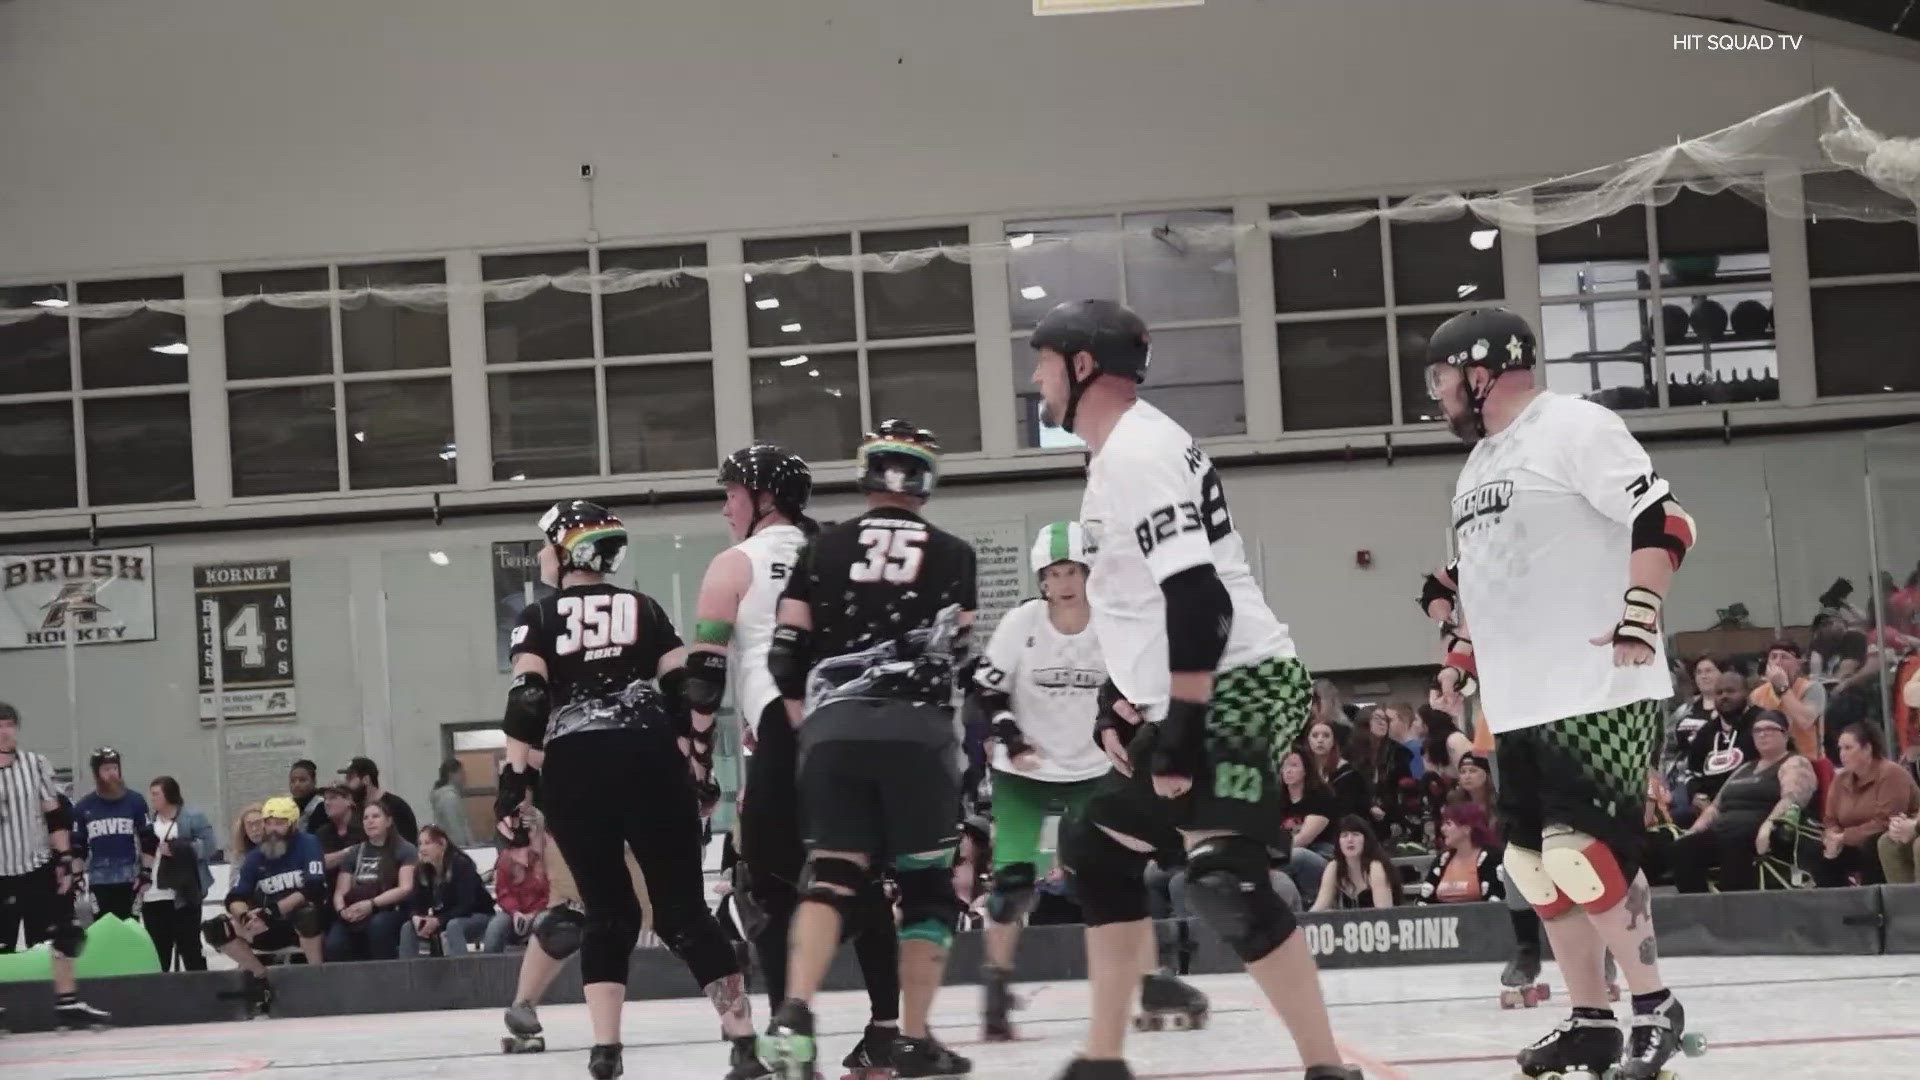 Indy's Race Rebels is one of 12 teams heading to England for the Men's Roller Derby Association's championship competition in October.